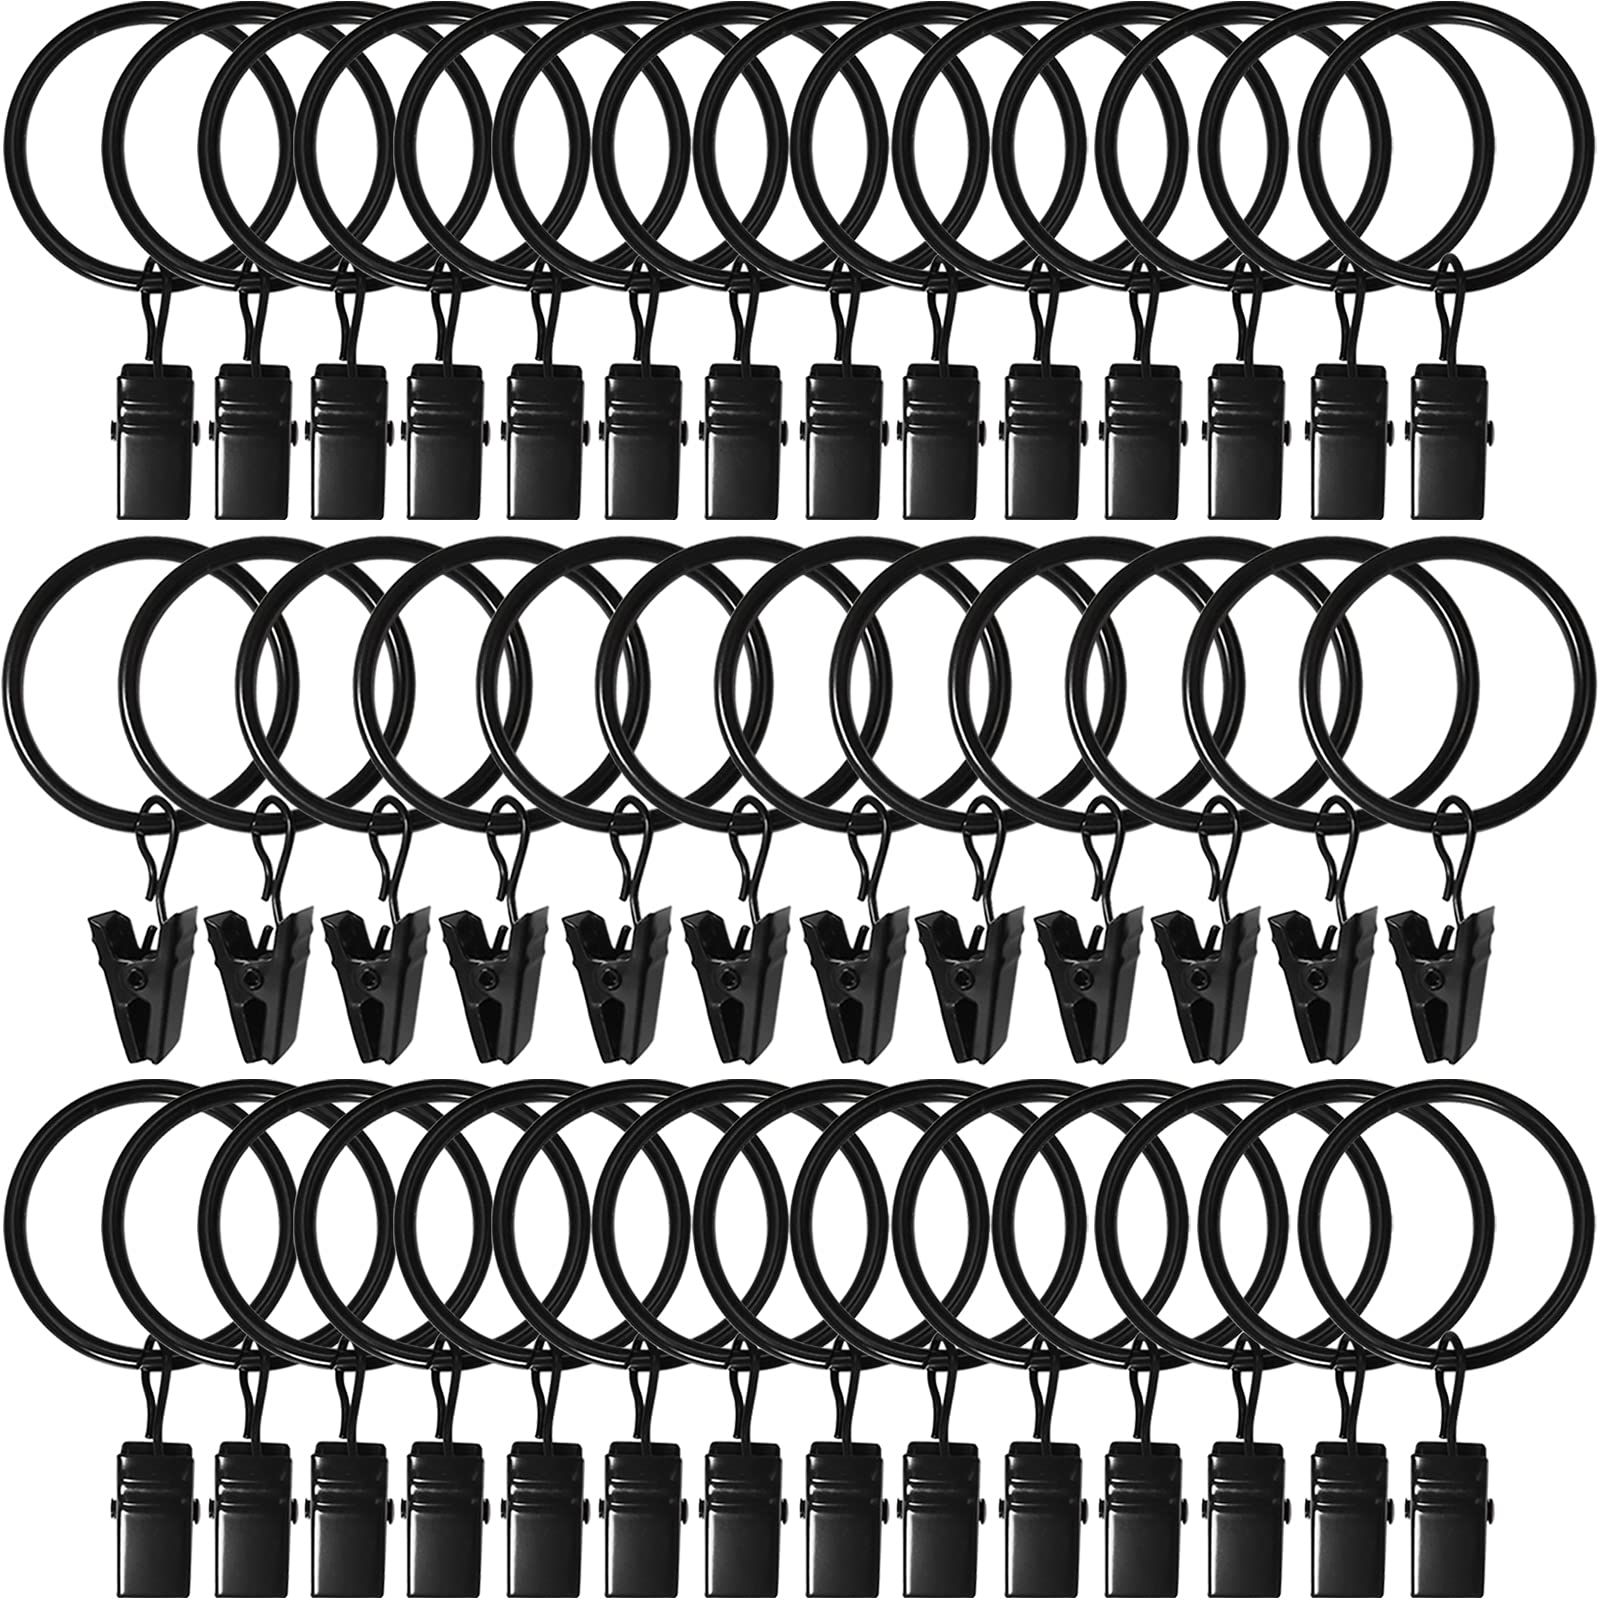 AMZSEVEN 40 Pack Curtain Rings with Clips, Drapery Clips with Rings, Hangers Drapes Rings 1.26 Inch Interior Diameter, Fits up to 1 Inch Curtain Rod, Vintage Black | Amazon (US)